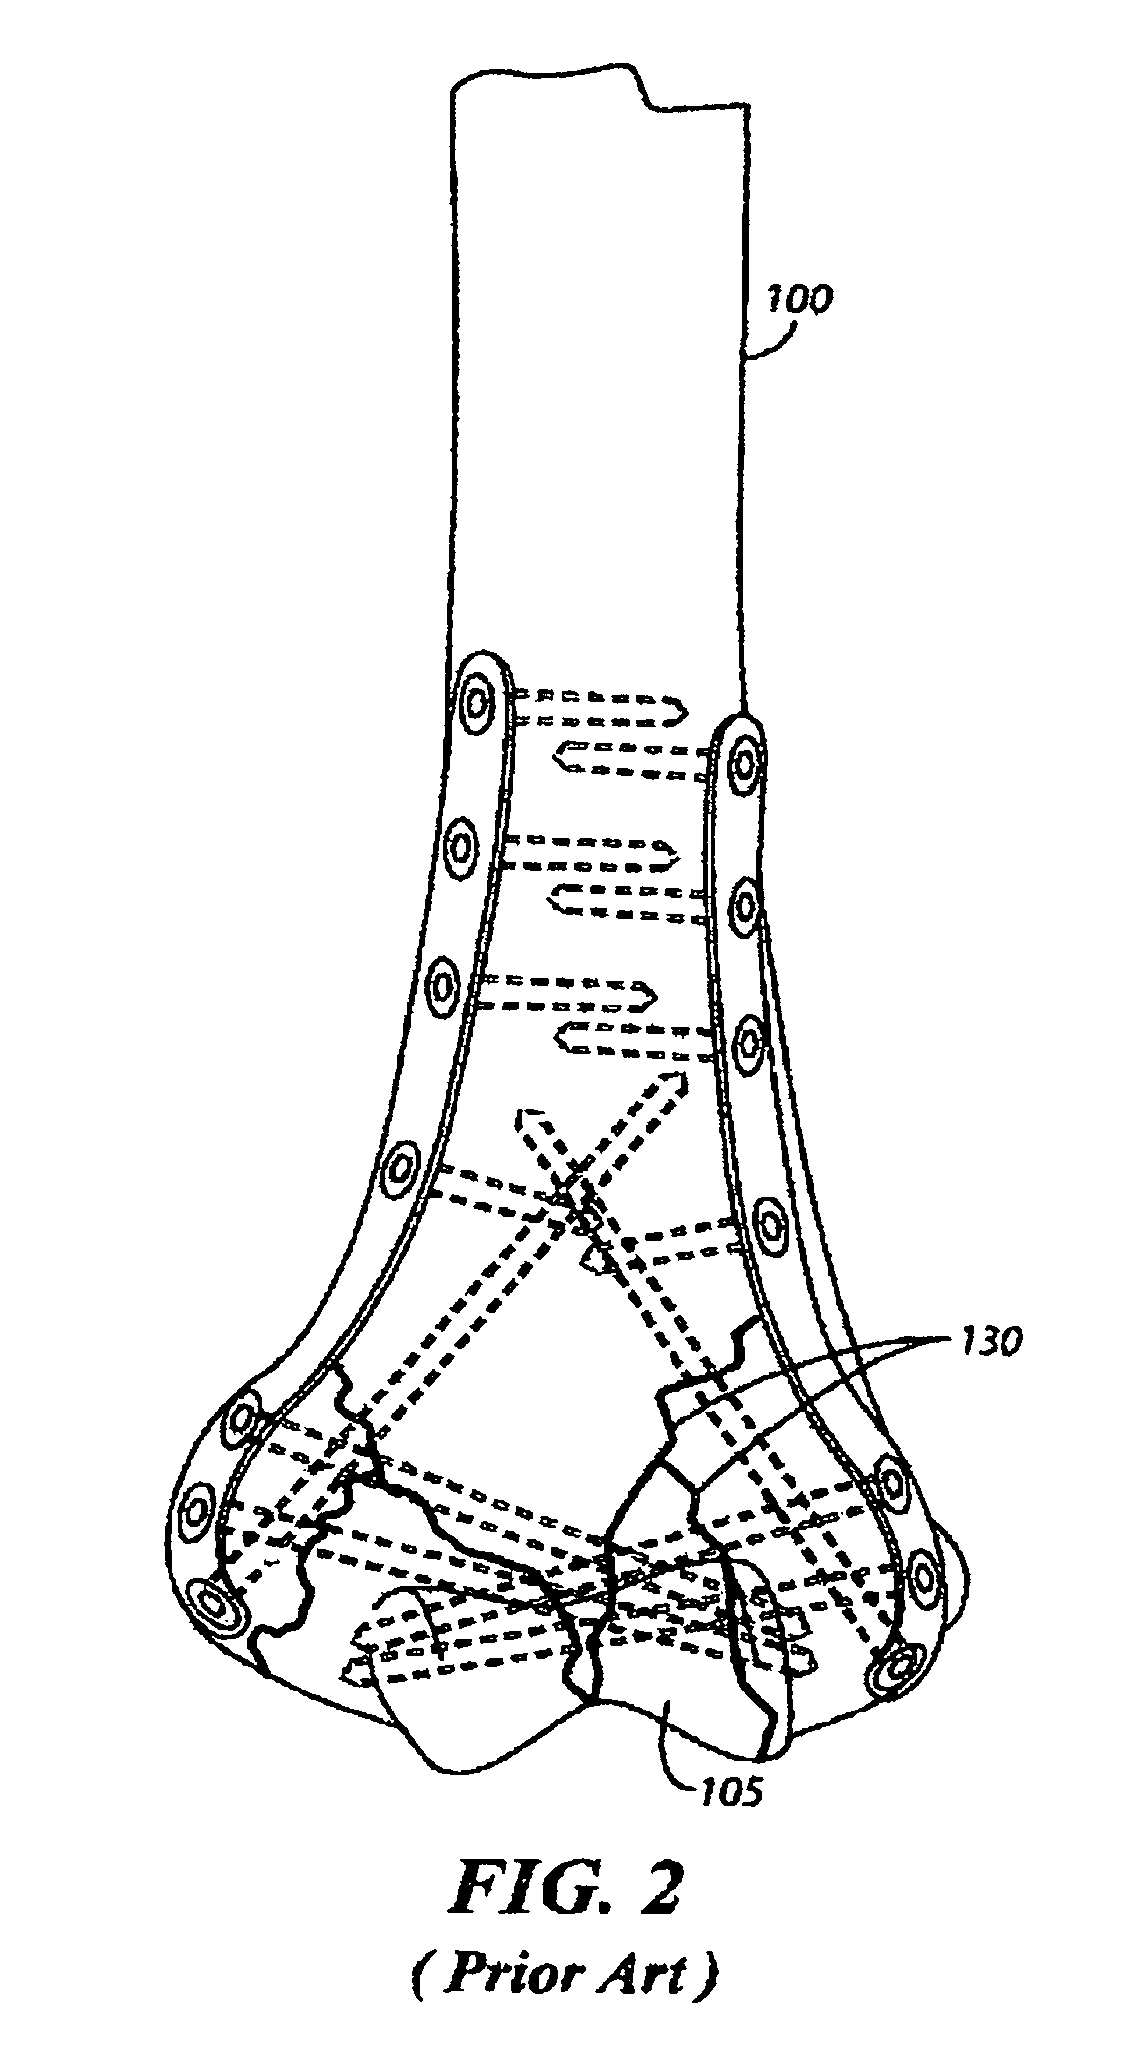 Fracture fixation system